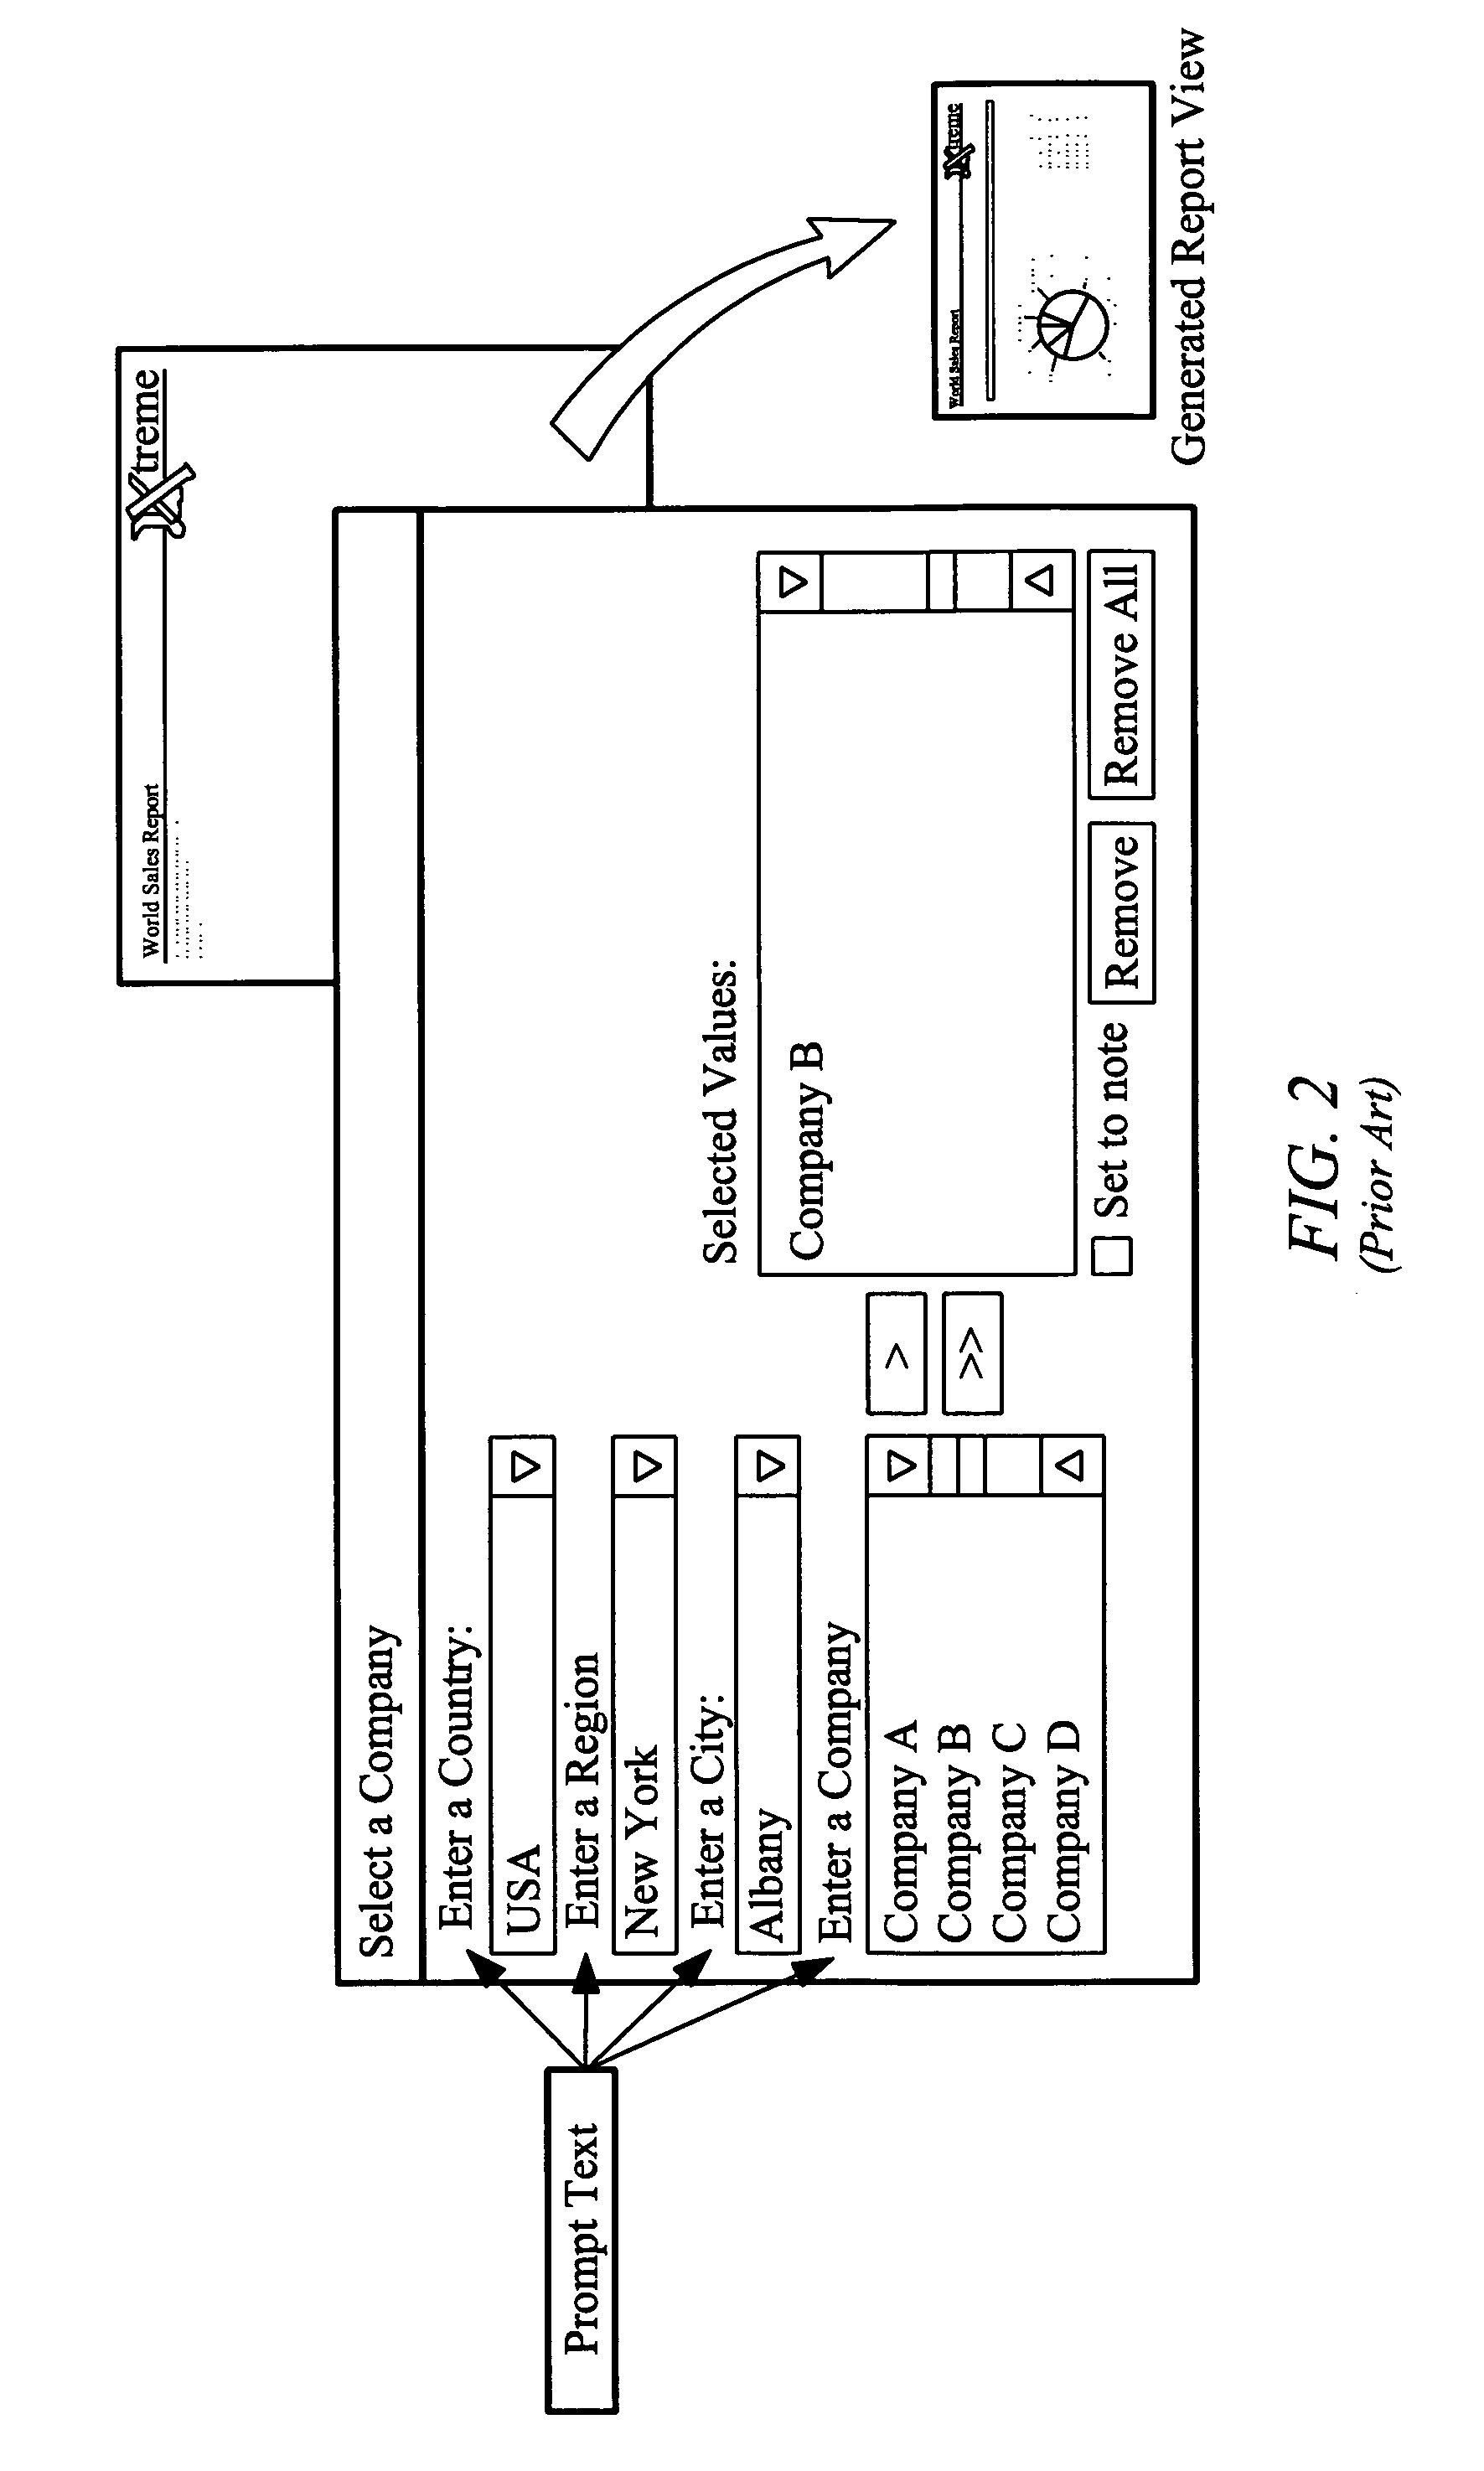 Apparatus and method for generating reports from shared objects